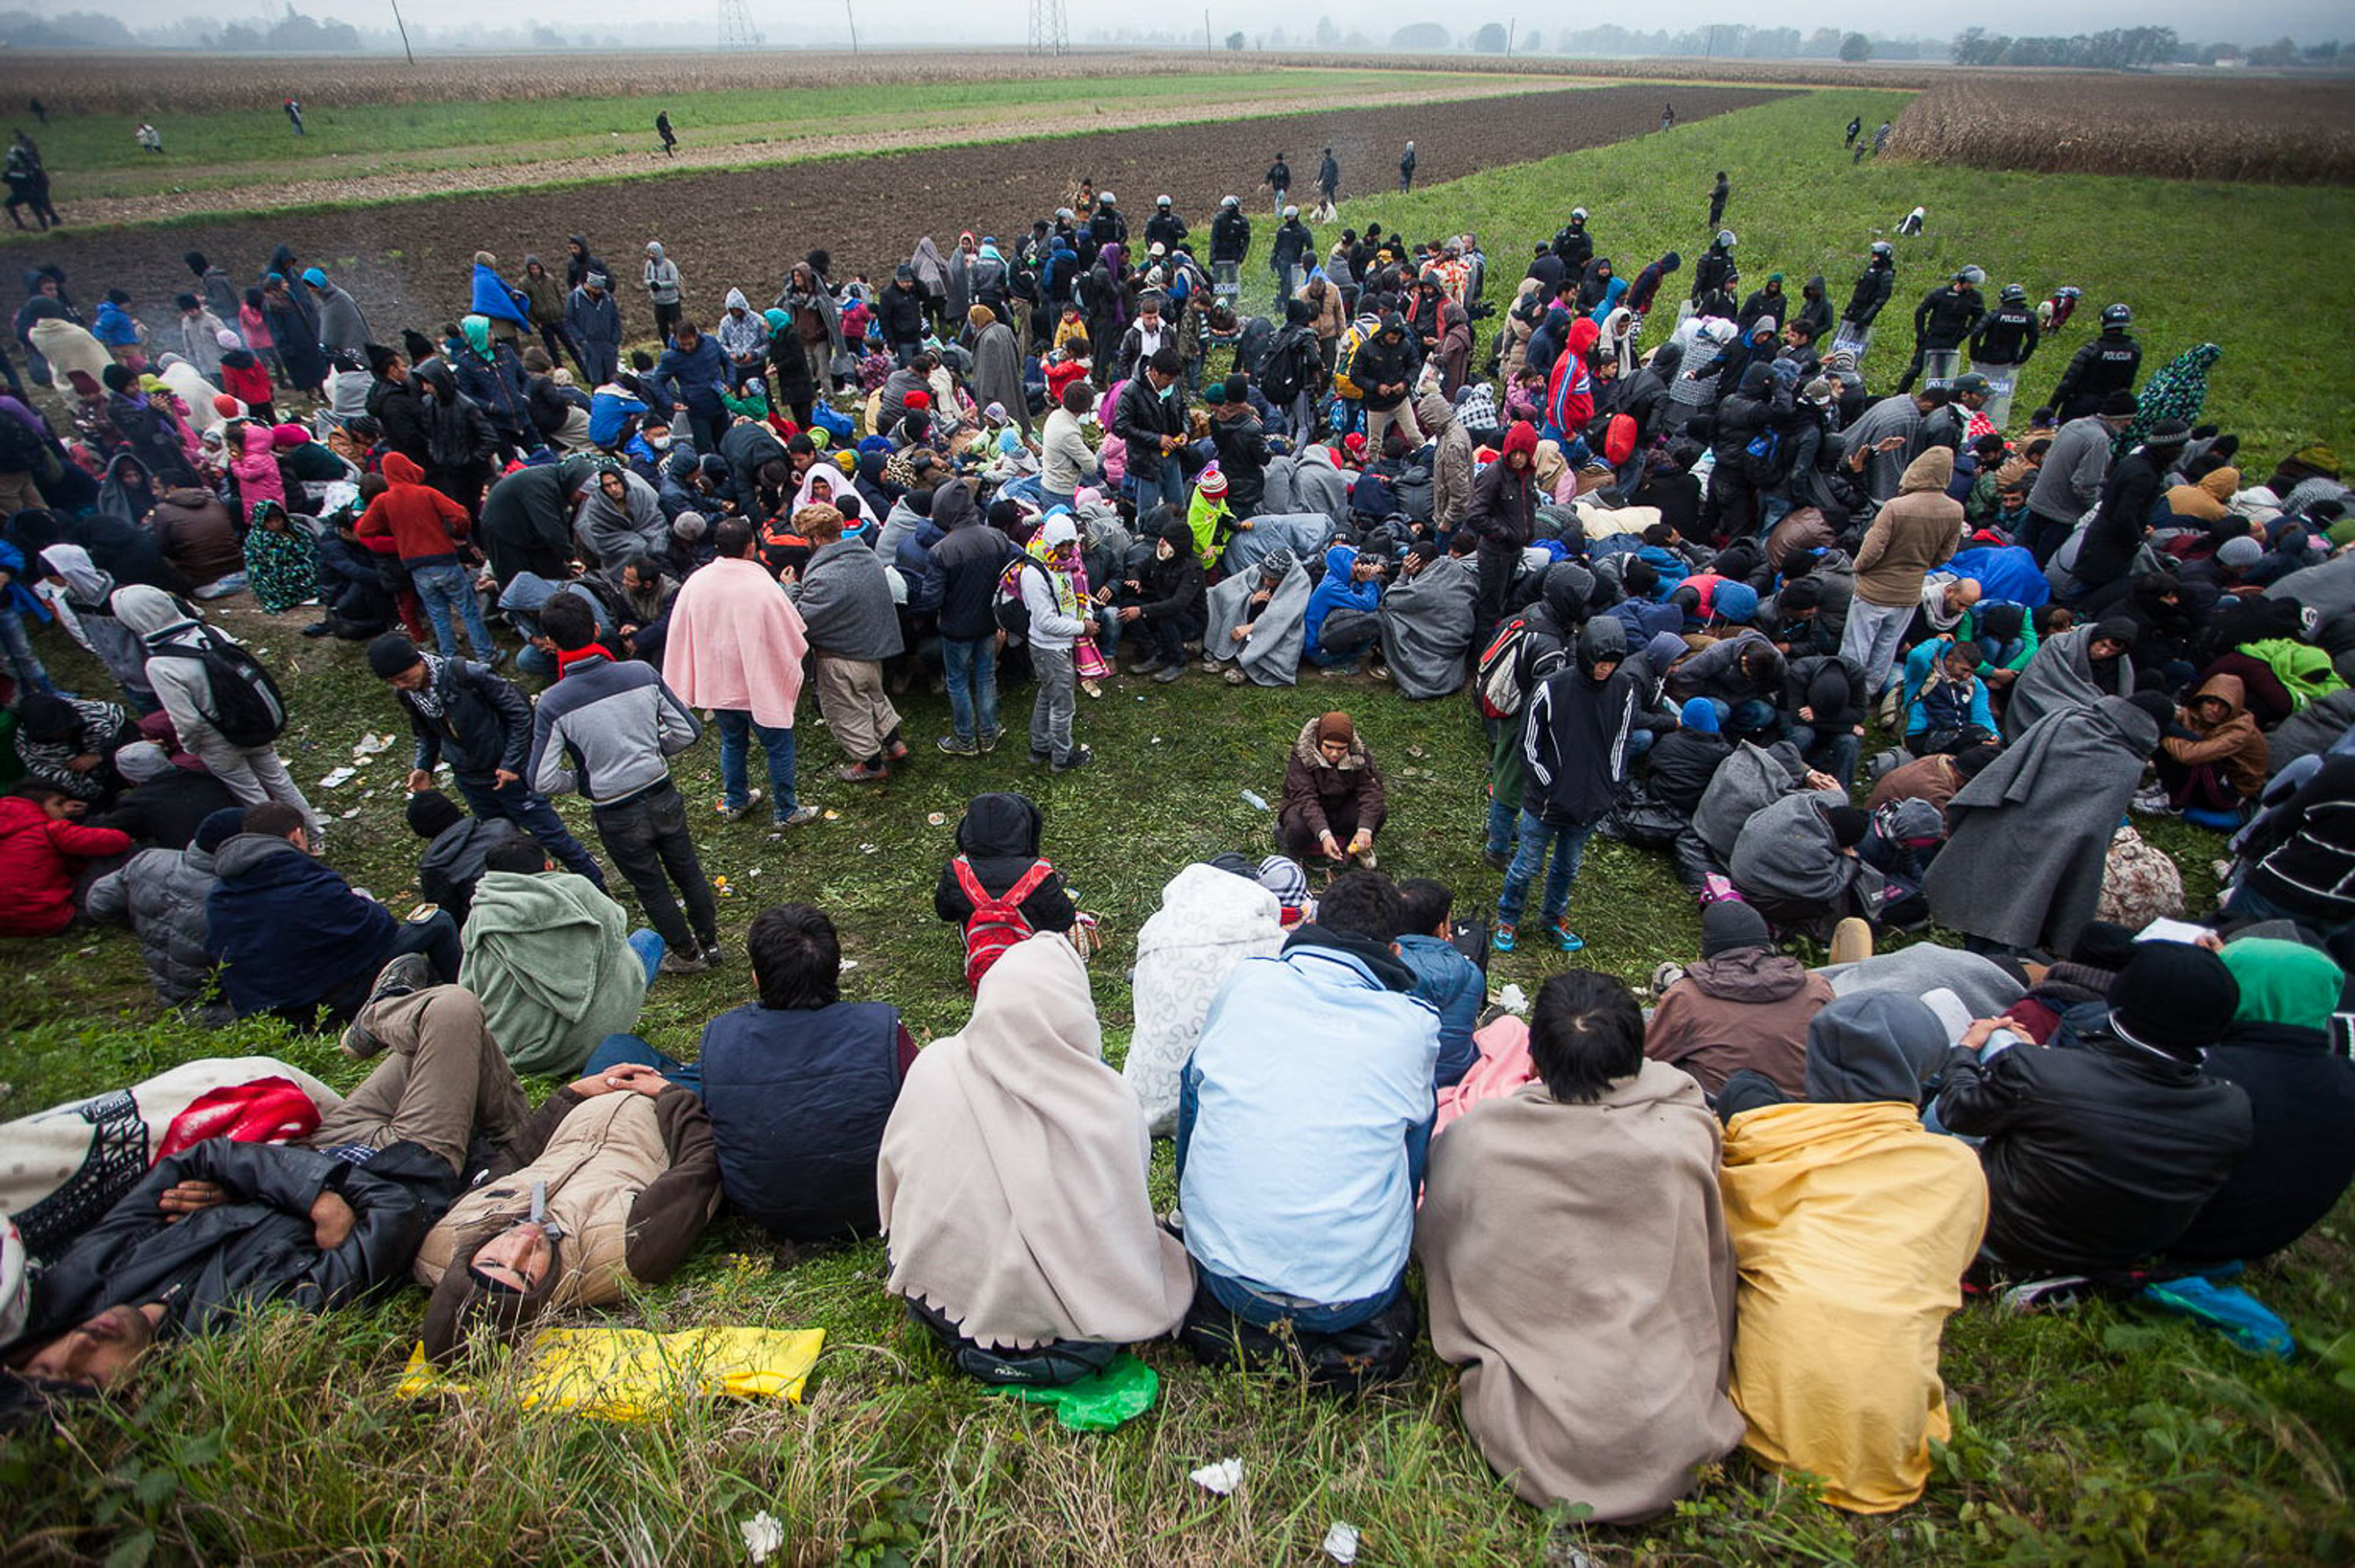 Refugees in the corn field at village of Rigonce, Slovenia waiting for bus transportation to take them to reception center in Dobova on October 21, 2015.In the Balkans, the situation at the various borders keeps changing very fast as countries try to slow down or stop the flow of refugees and migrants. At the time of writing, the border between Croatia and Slovenia was open, while the one between Serbia and Croatia was closed. This last one has opened and closed intermittently in the last 48 hours. The various border closures have had knock-on effects of increased crowding and frustration at several points.Â From 8am on Tuesday until 8am on Wednesday, 6,994 refugees entered Croatia. Thousands were stuck just inside the Slovenian border in a corn field in Rigonce, having arrived there by foot, according to refugees Over a thousand more awaited registration in Dobova. Photo: Igor Pavicevic / Kamerades